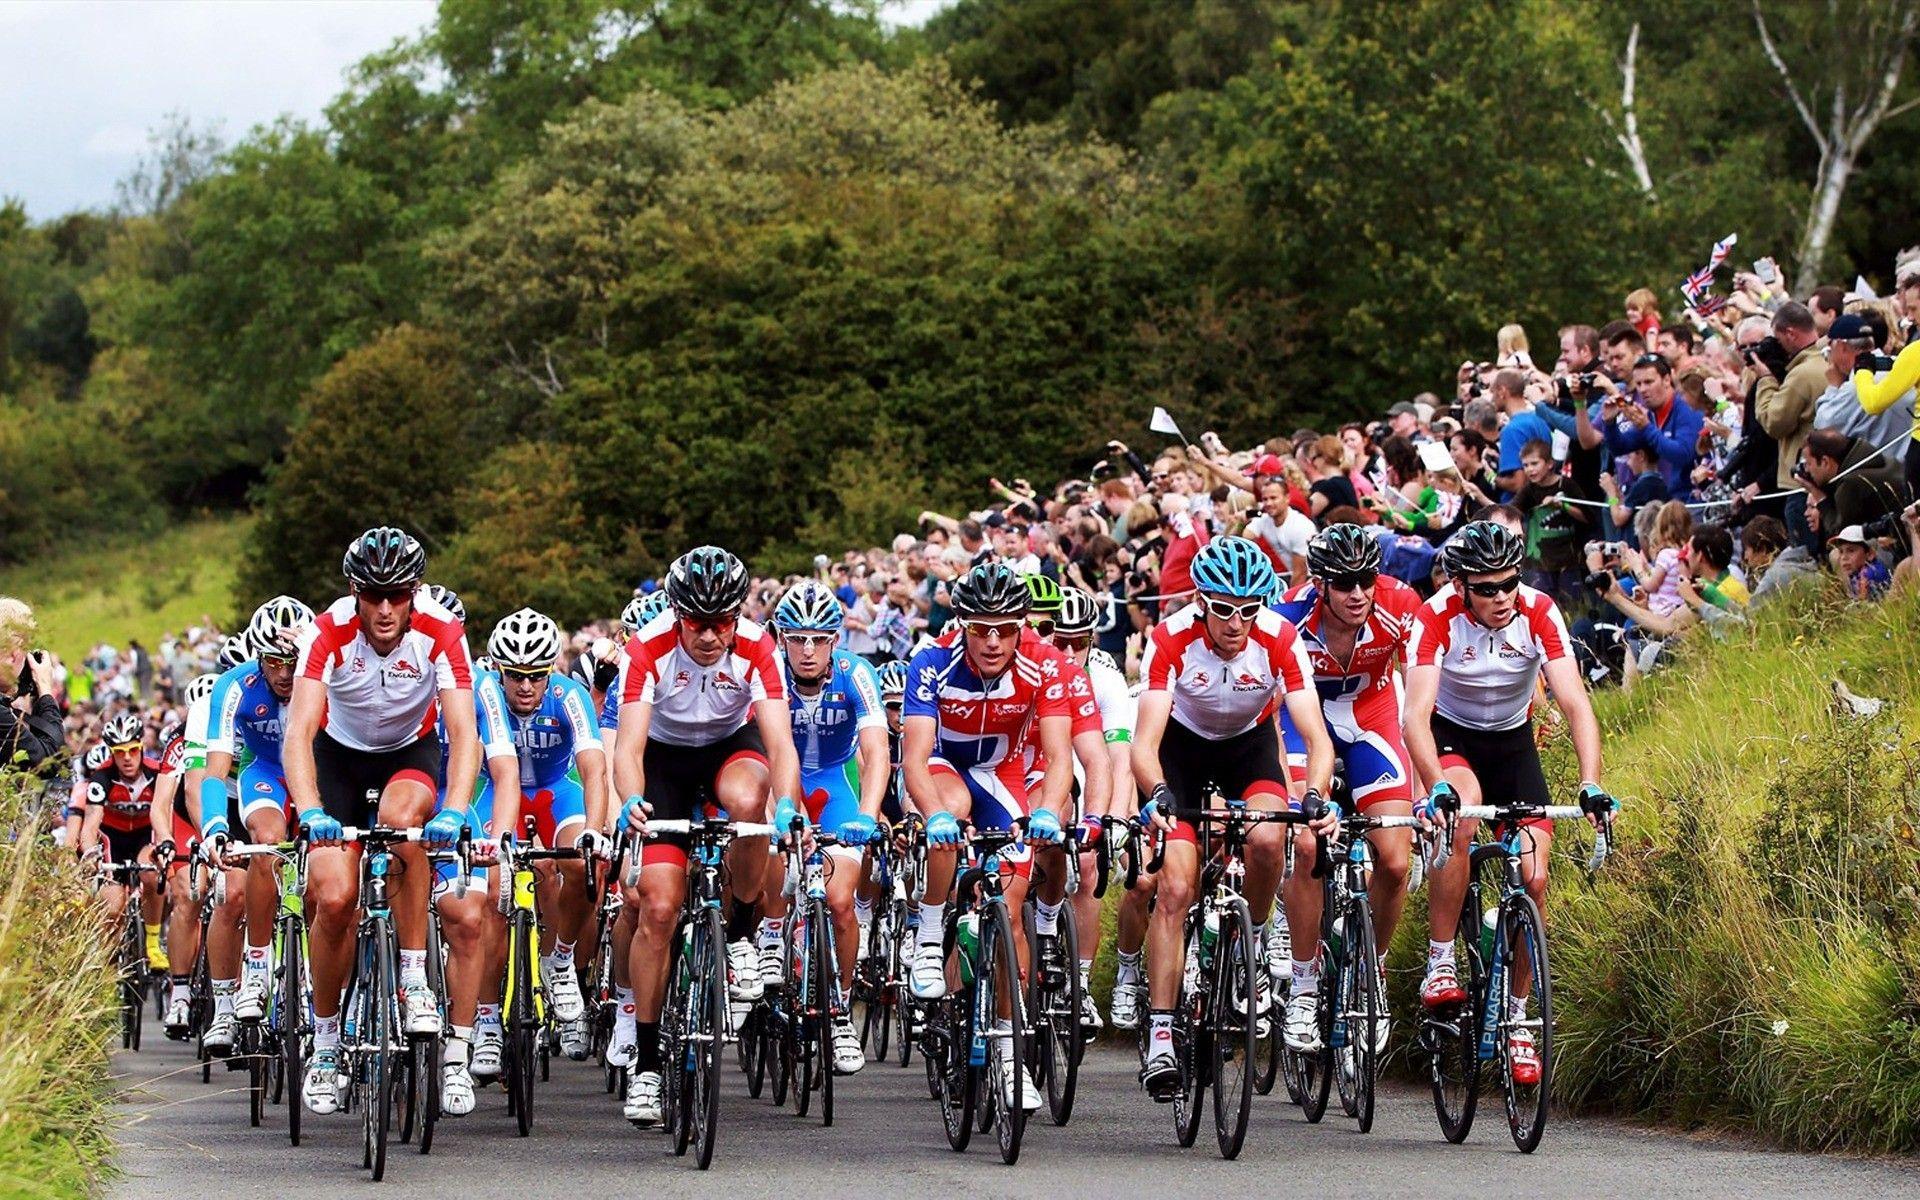 Surrey Cycle Classic. Android wallpaper for free